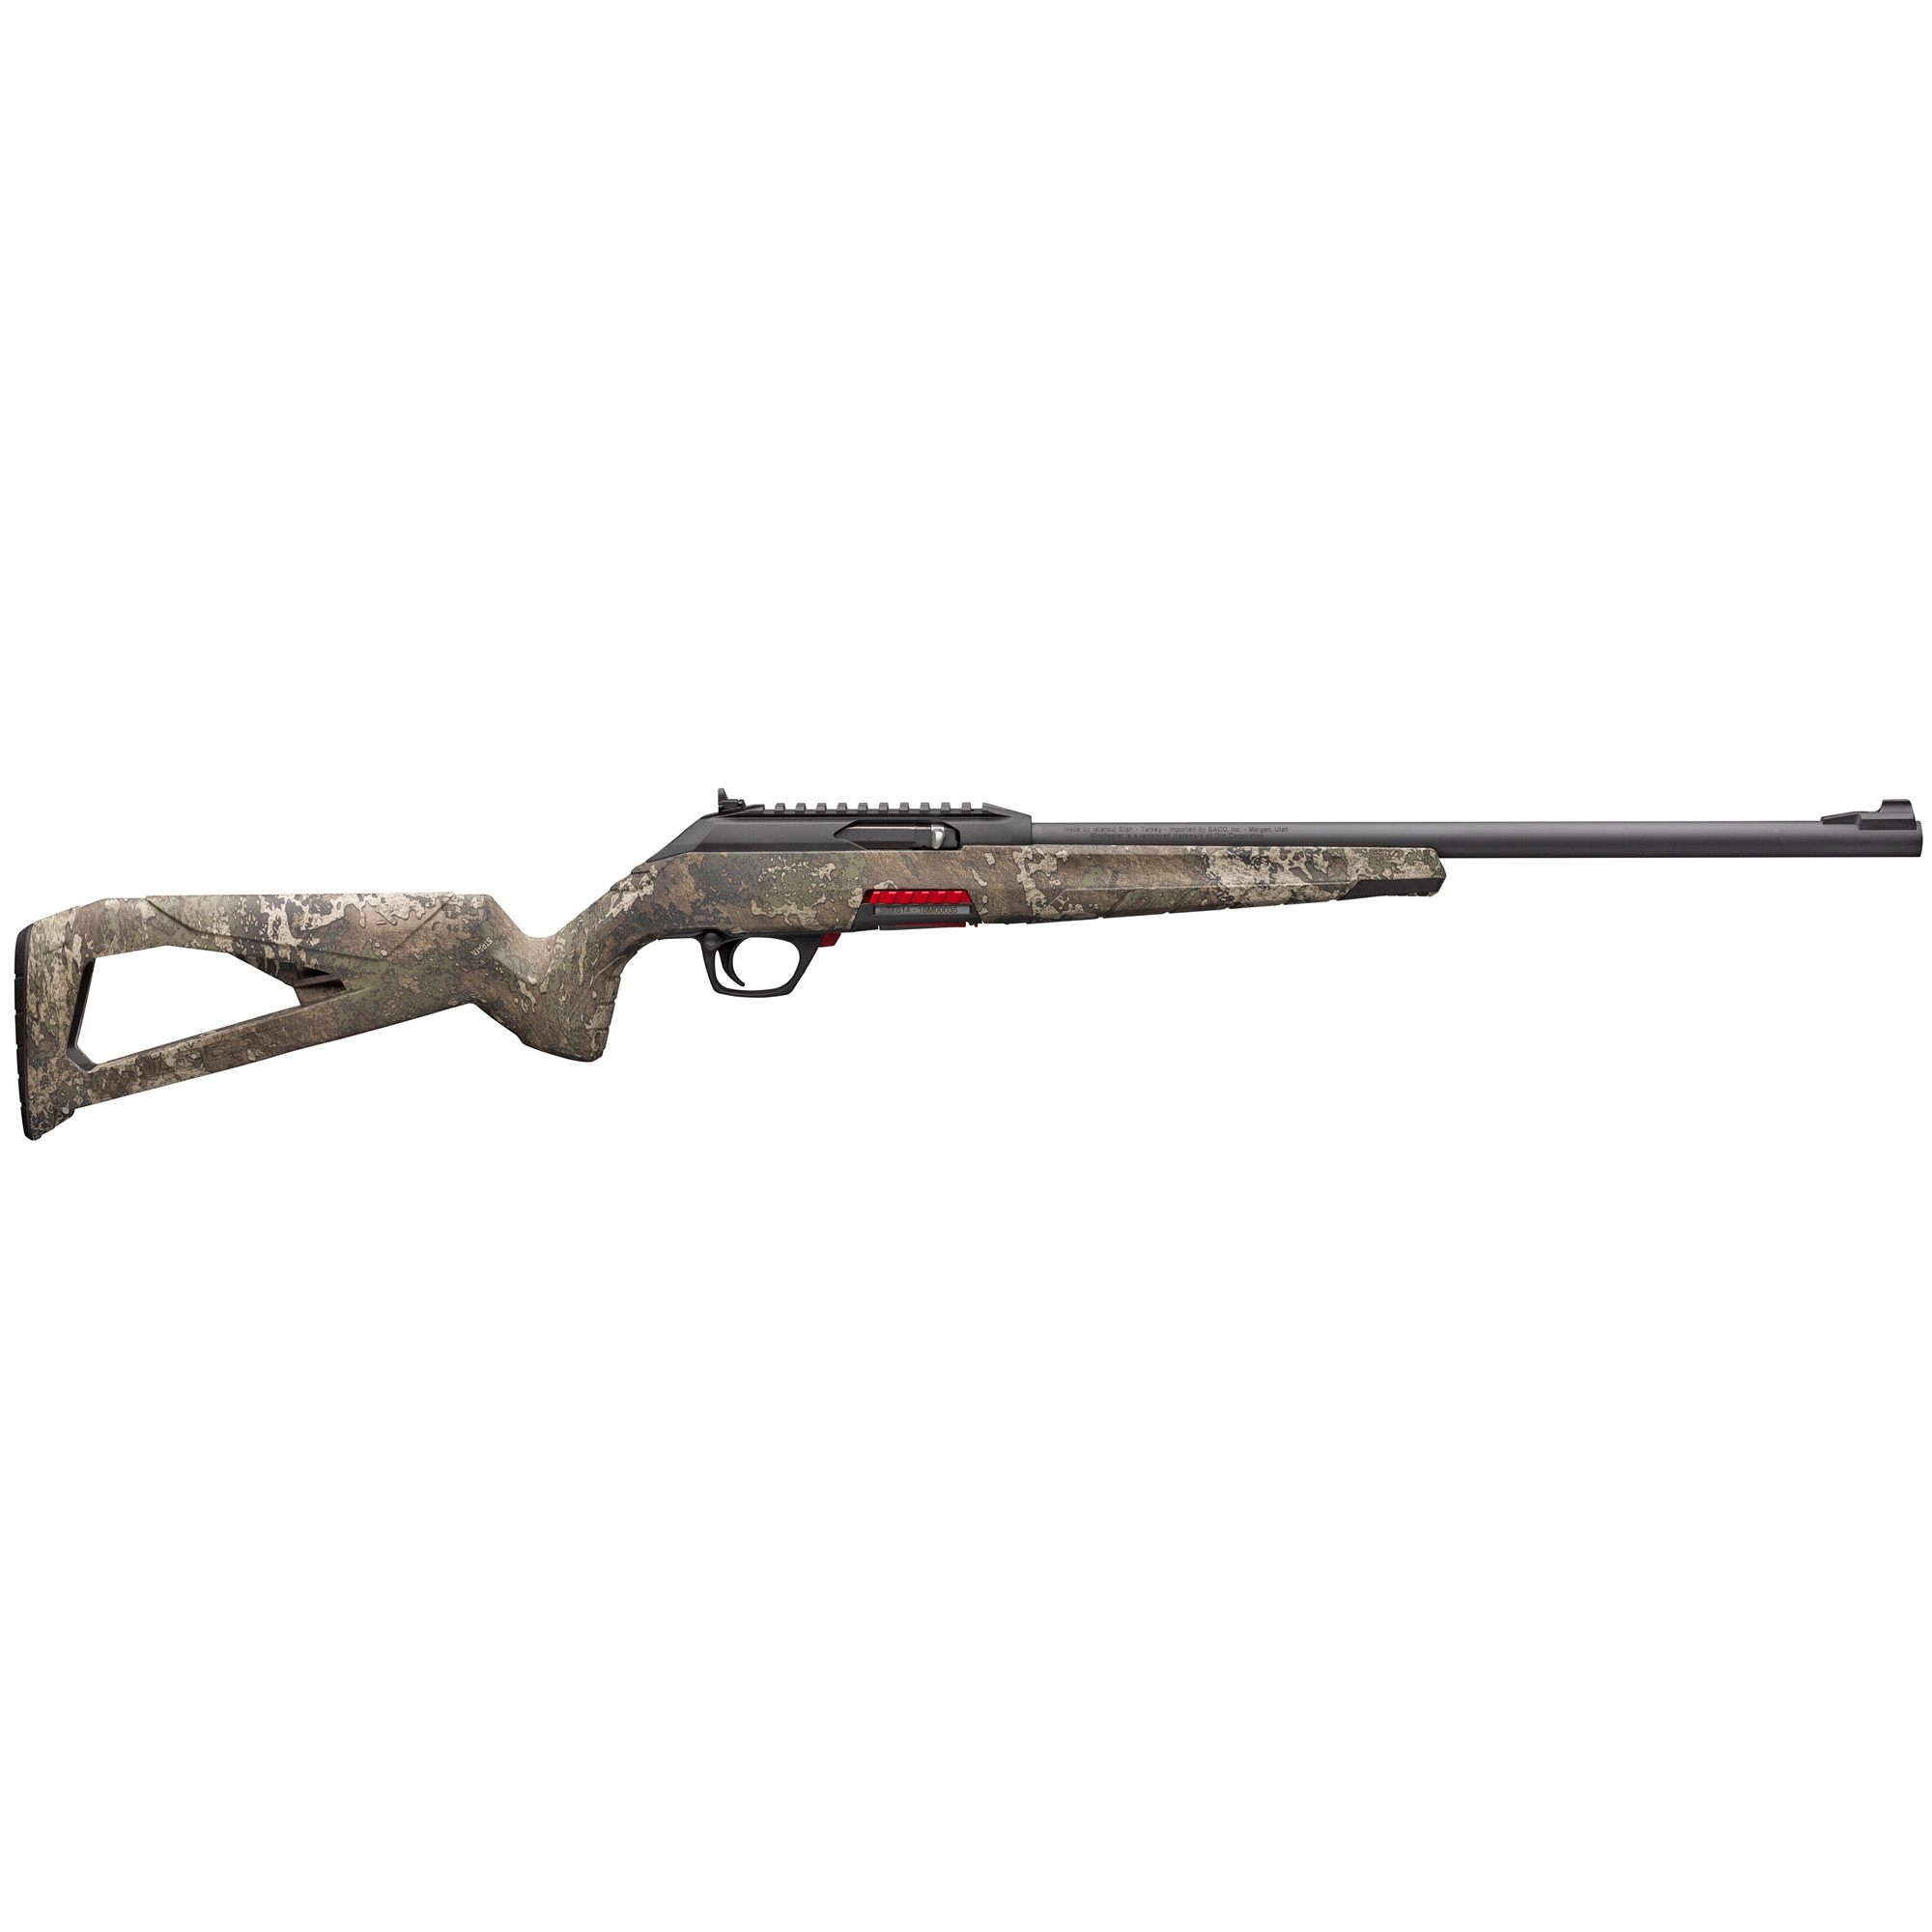 Winchester Repeating Arms, Wildcat, Semi-automatic Rifle, 22 LR, 18" Sporter Contour Barrel, True Timber Strata, Right Hand, Ghost Ring Sight, Composite Stock, 10 Rounds